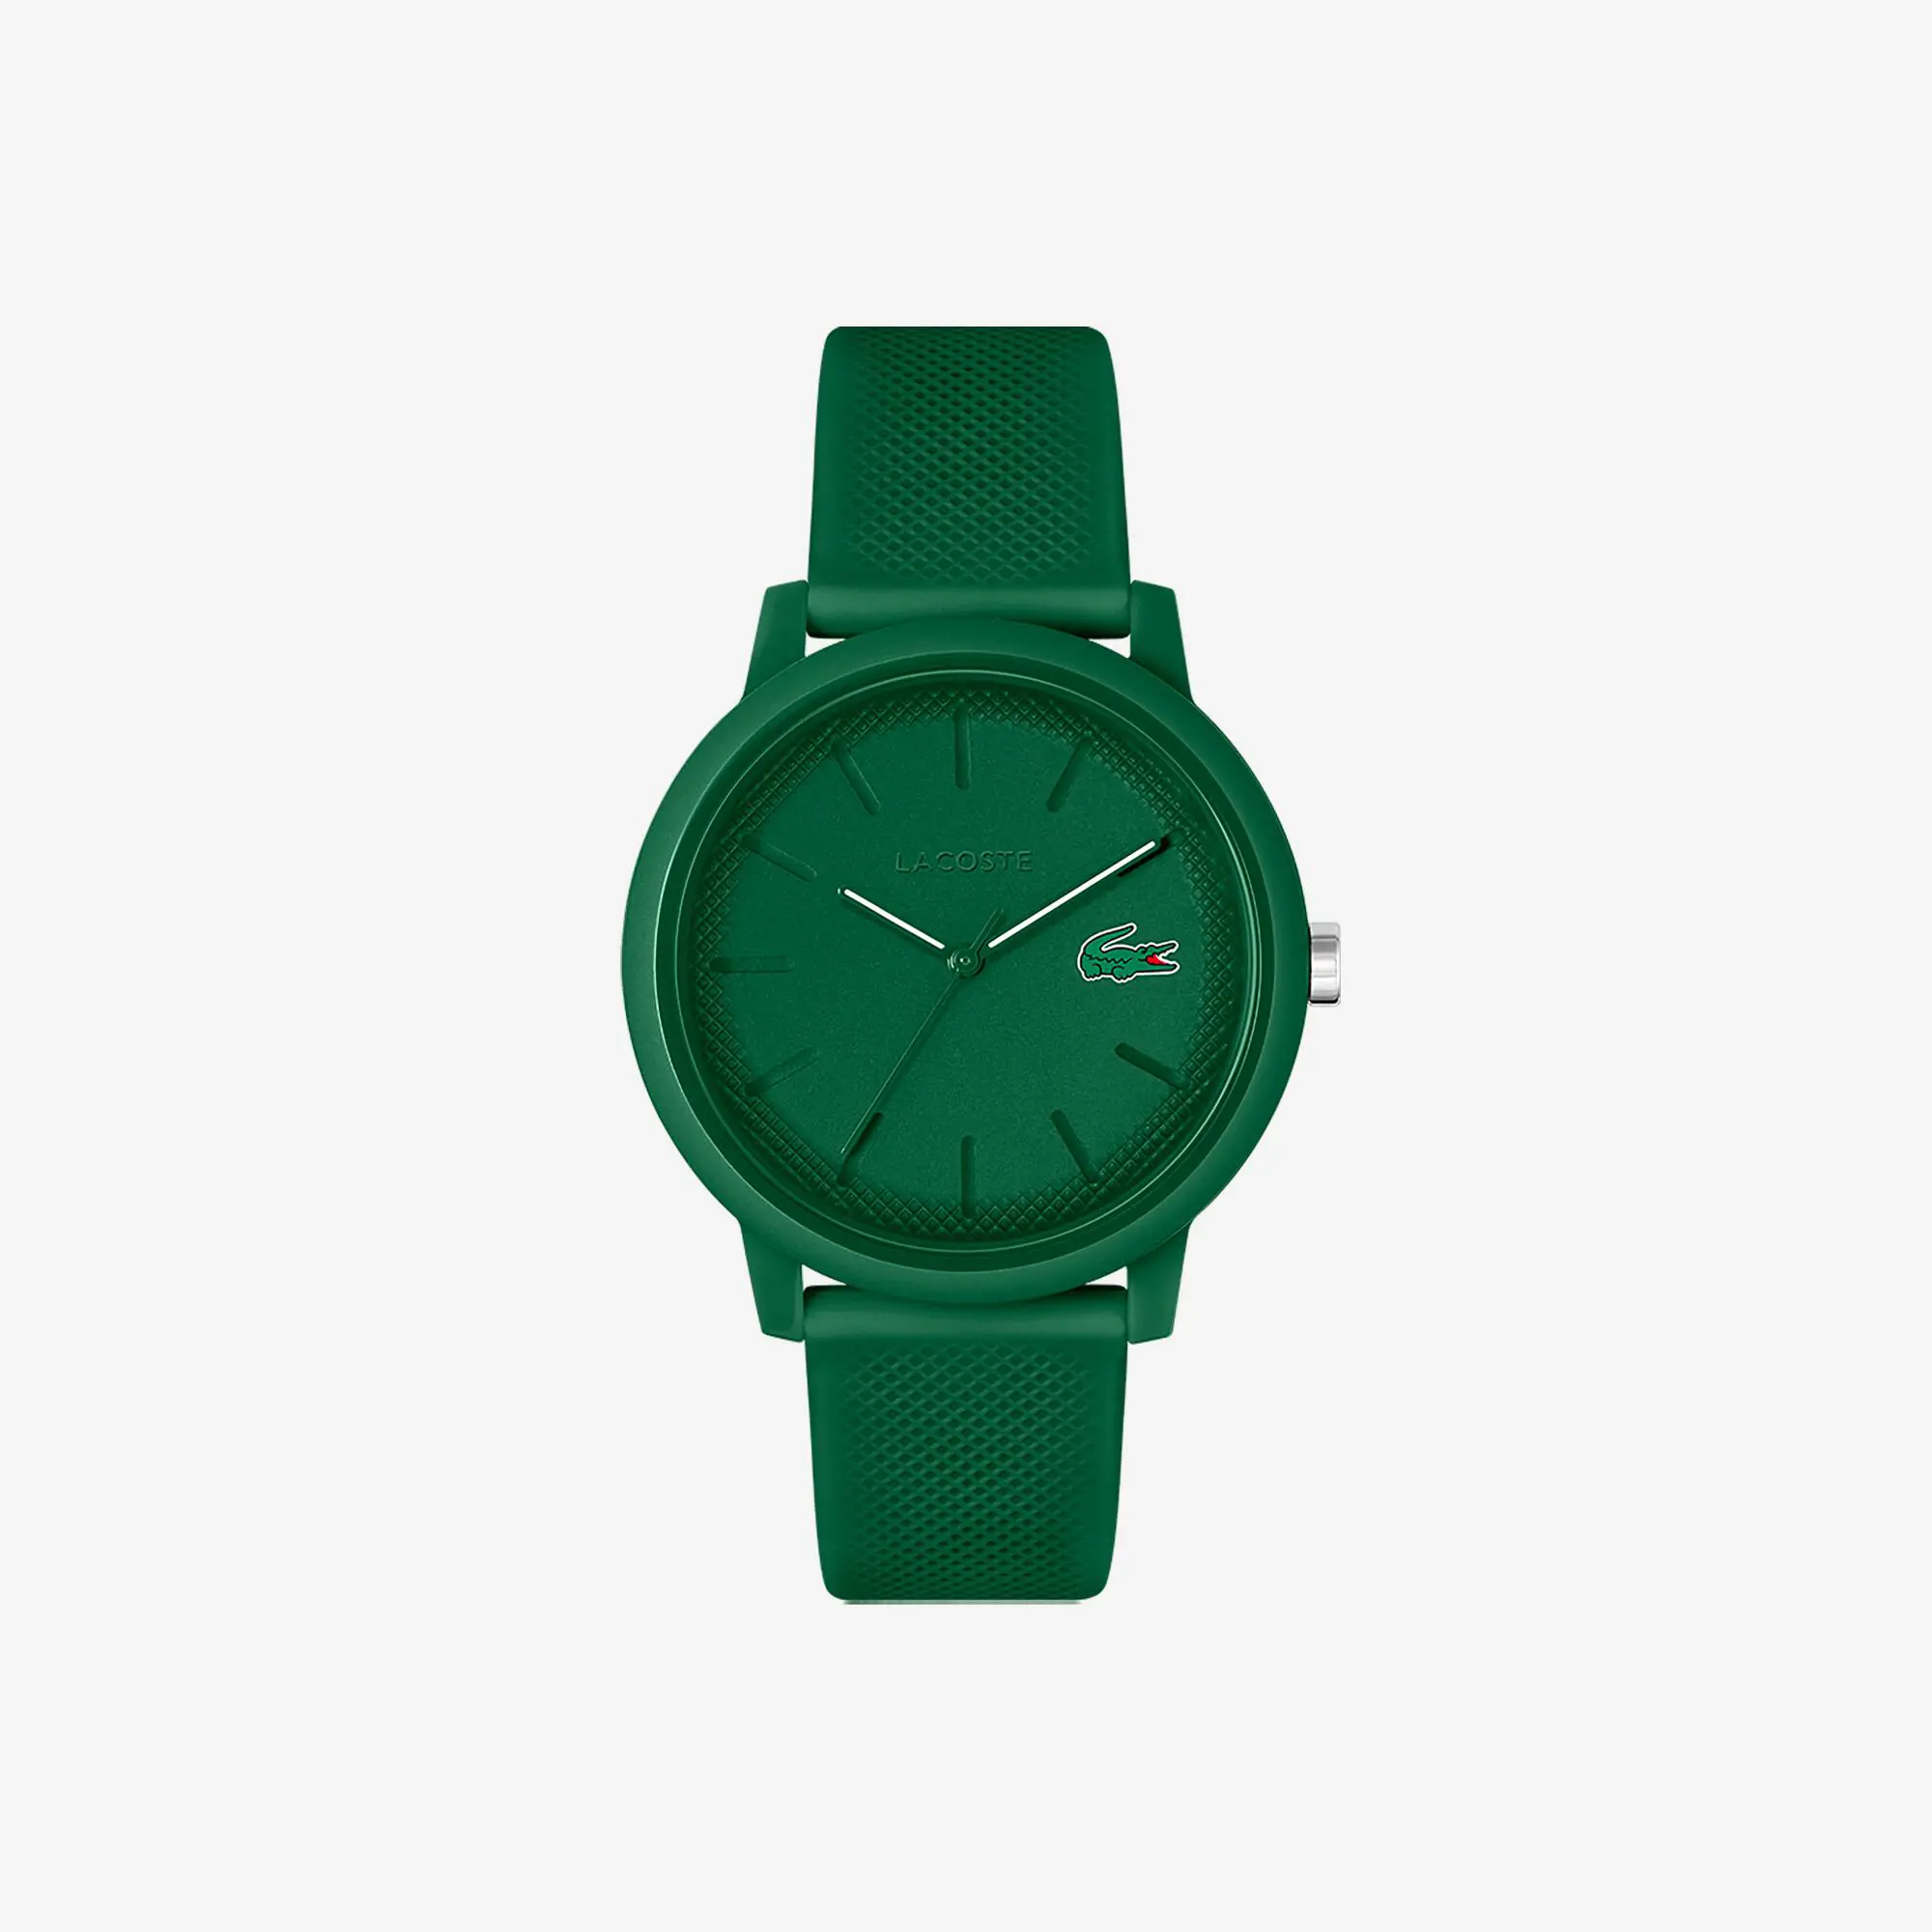 Lacoste Men’s Lacoste.12.12 Green Silicone Strap Watch. 1